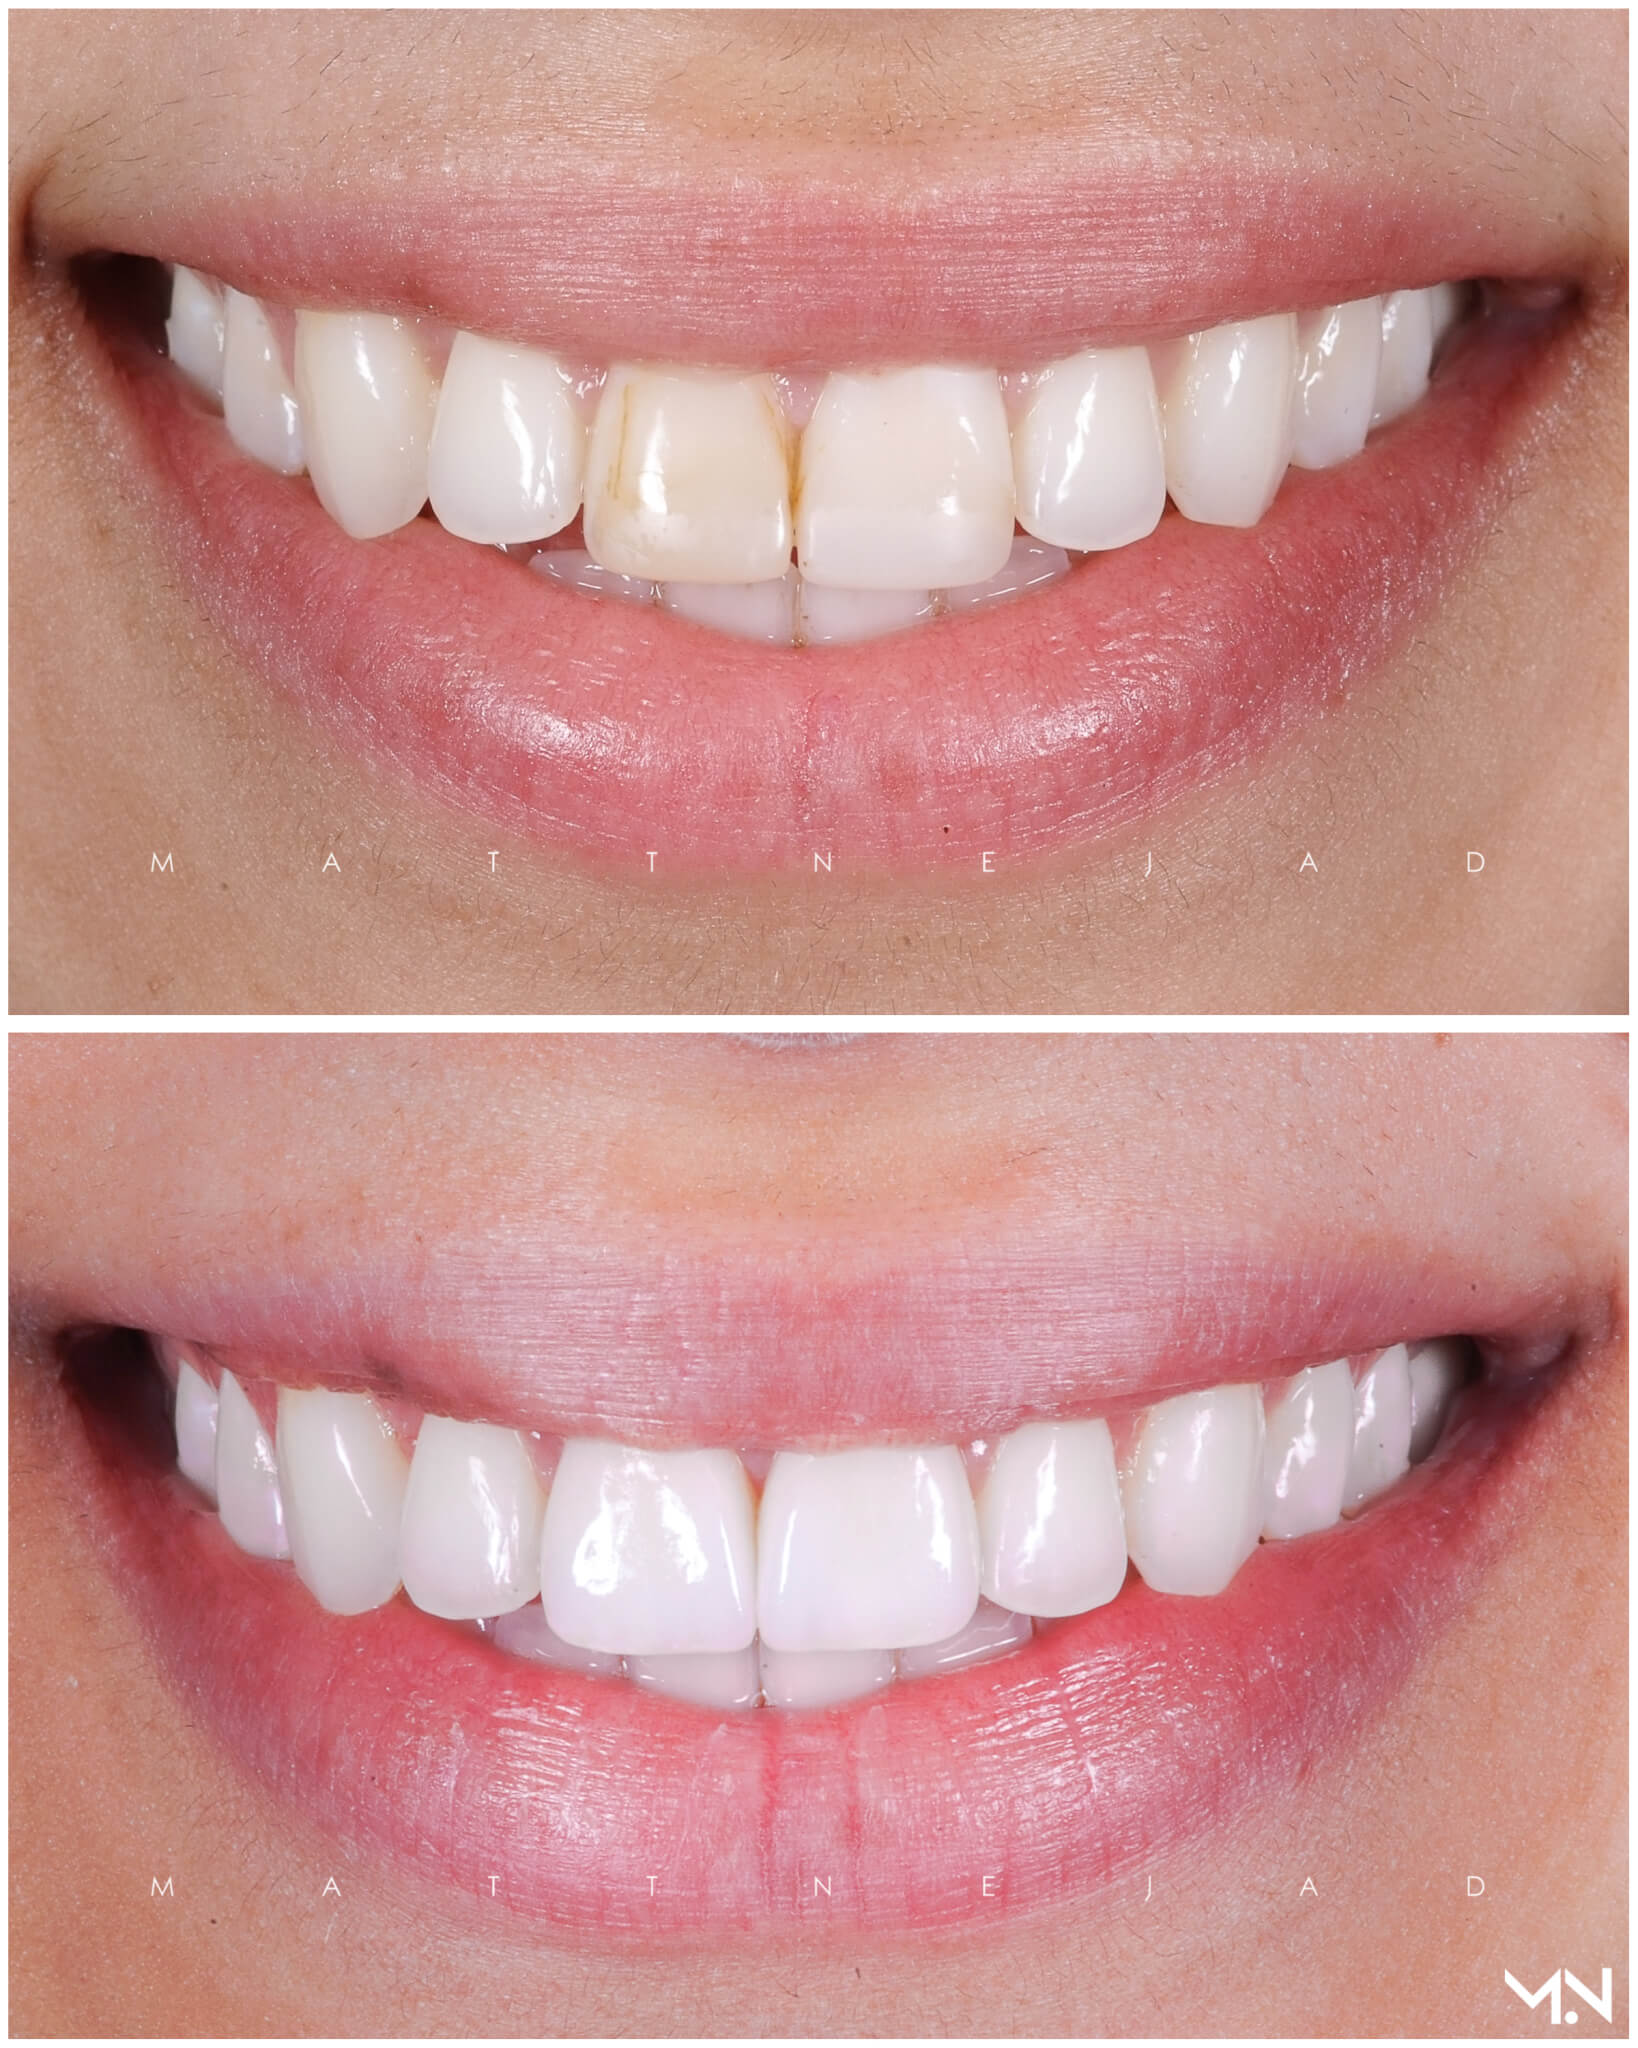 Cosmetic Smile Makeover with 2 Porcelain Veneers to replace failing bondings- Before and after